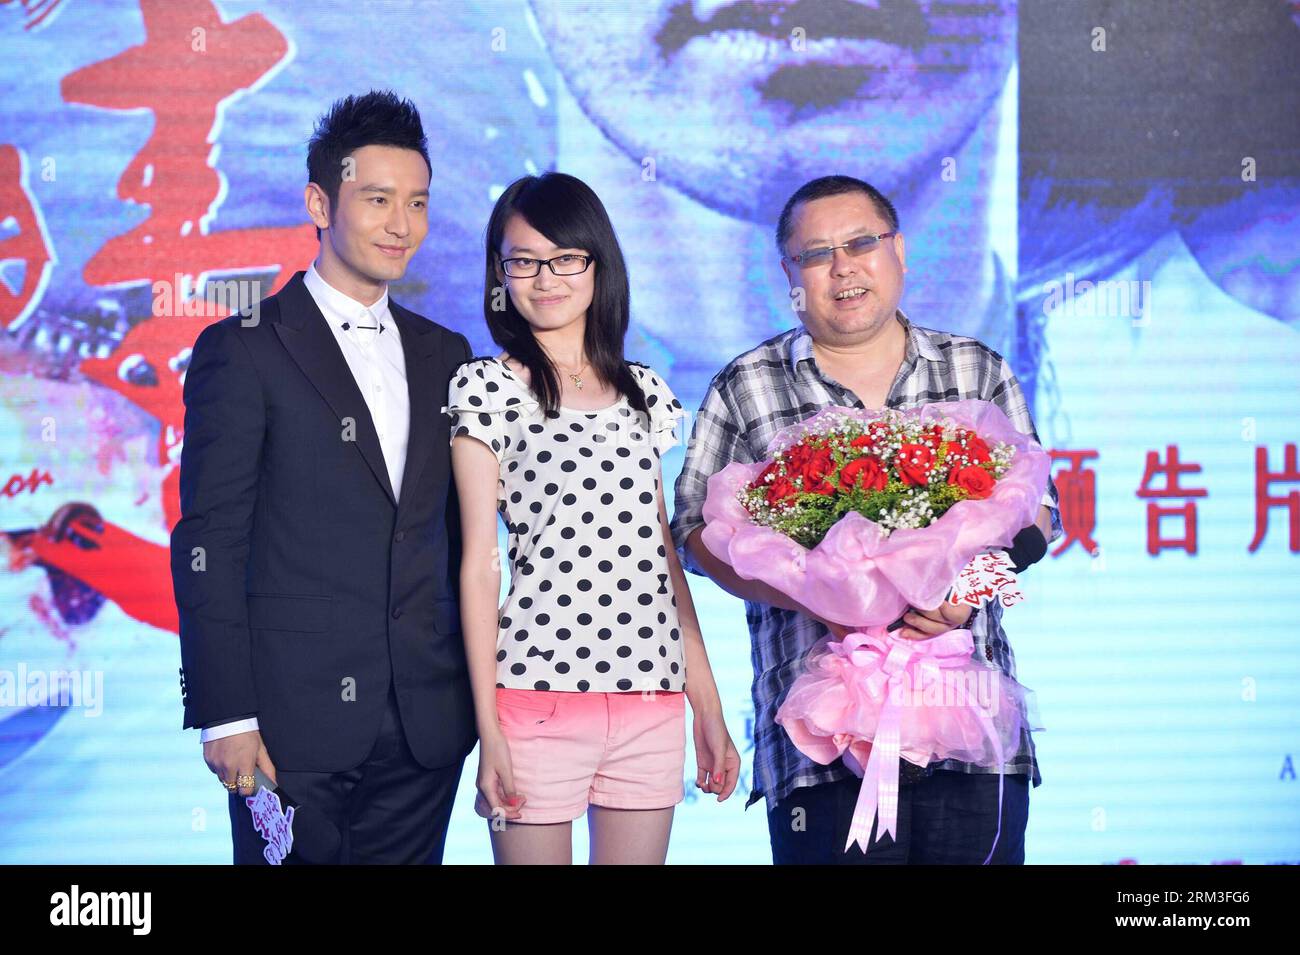 Bildnummer: 60171426  Datum: 22.07.2013  Copyright: imago/Xinhua BEIJING, July, 2013 - Actor Huang Xiaoming (L), director Gao Qunshu (R) and a movie fan pose for photos during the trailer release conference of the movie Crimes of Passion in Beijing, capital of China, July 22, 2013. The movie Crimes of Passion directed by Gao Qunshu will hit the screen on Aug. 9. (Xinhua/Zhao Dingzhe) (cjq) CHINA-BEIJING-MOVIE TRAILER RELEASE (CN) PUBLICATIONxNOTxINxCHN People Entertainment xns x0x 2013 quer     60171426 Date 22 07 2013 Copyright Imago XINHUA Beijing July 2013 Actor Huang Xiao Ming l Director G Stock Photo